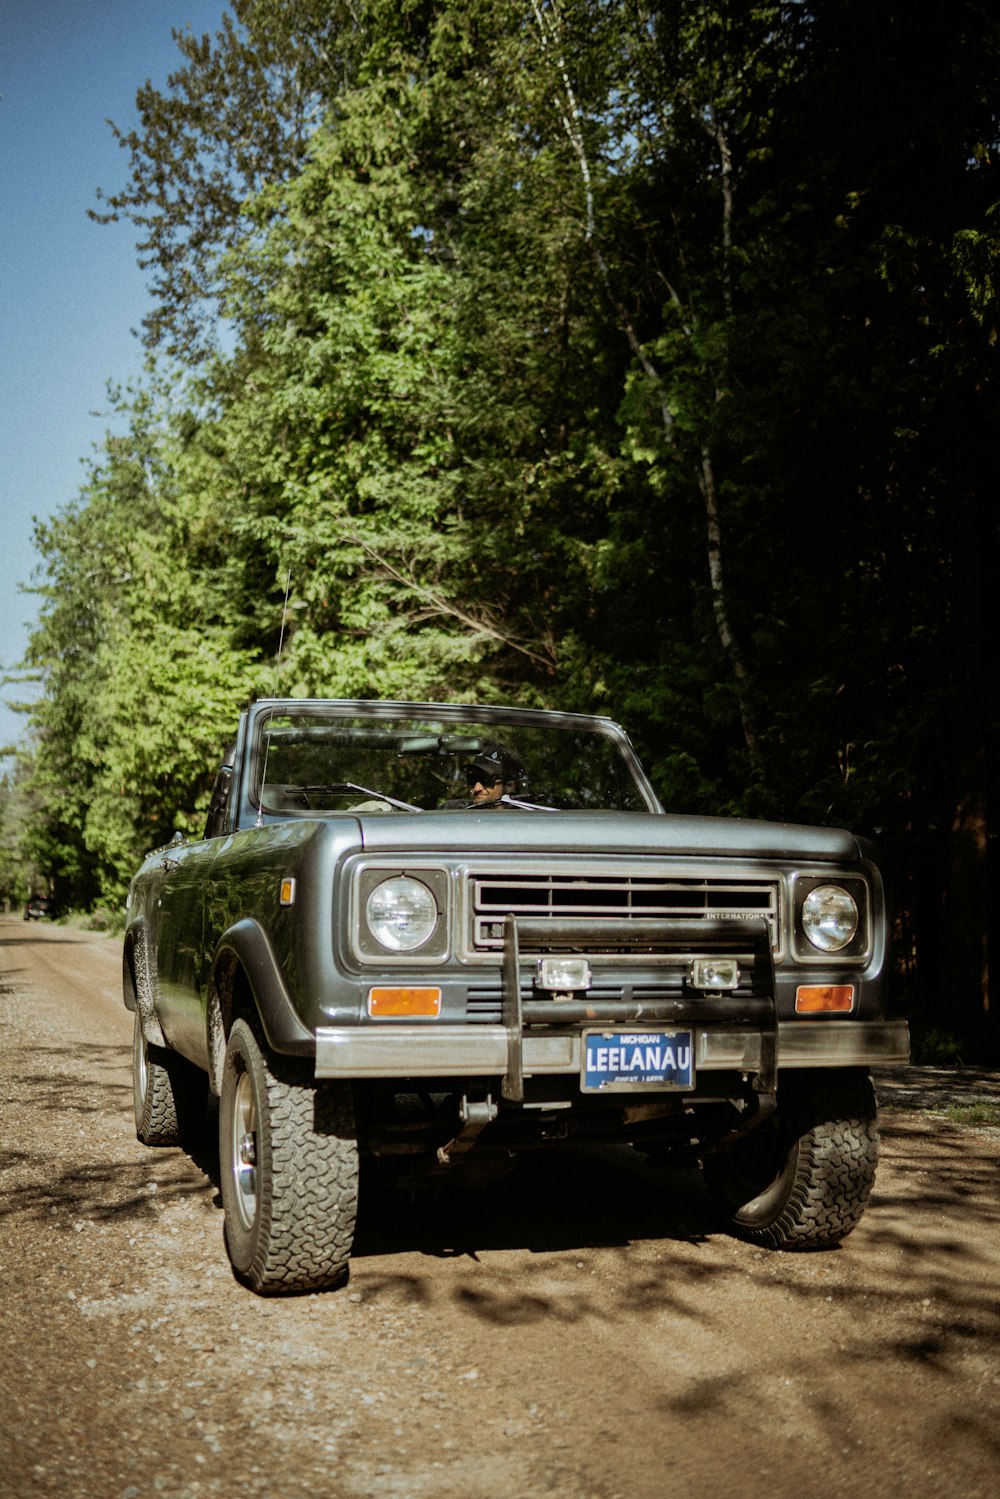 a truck parked on the side of a dirt road